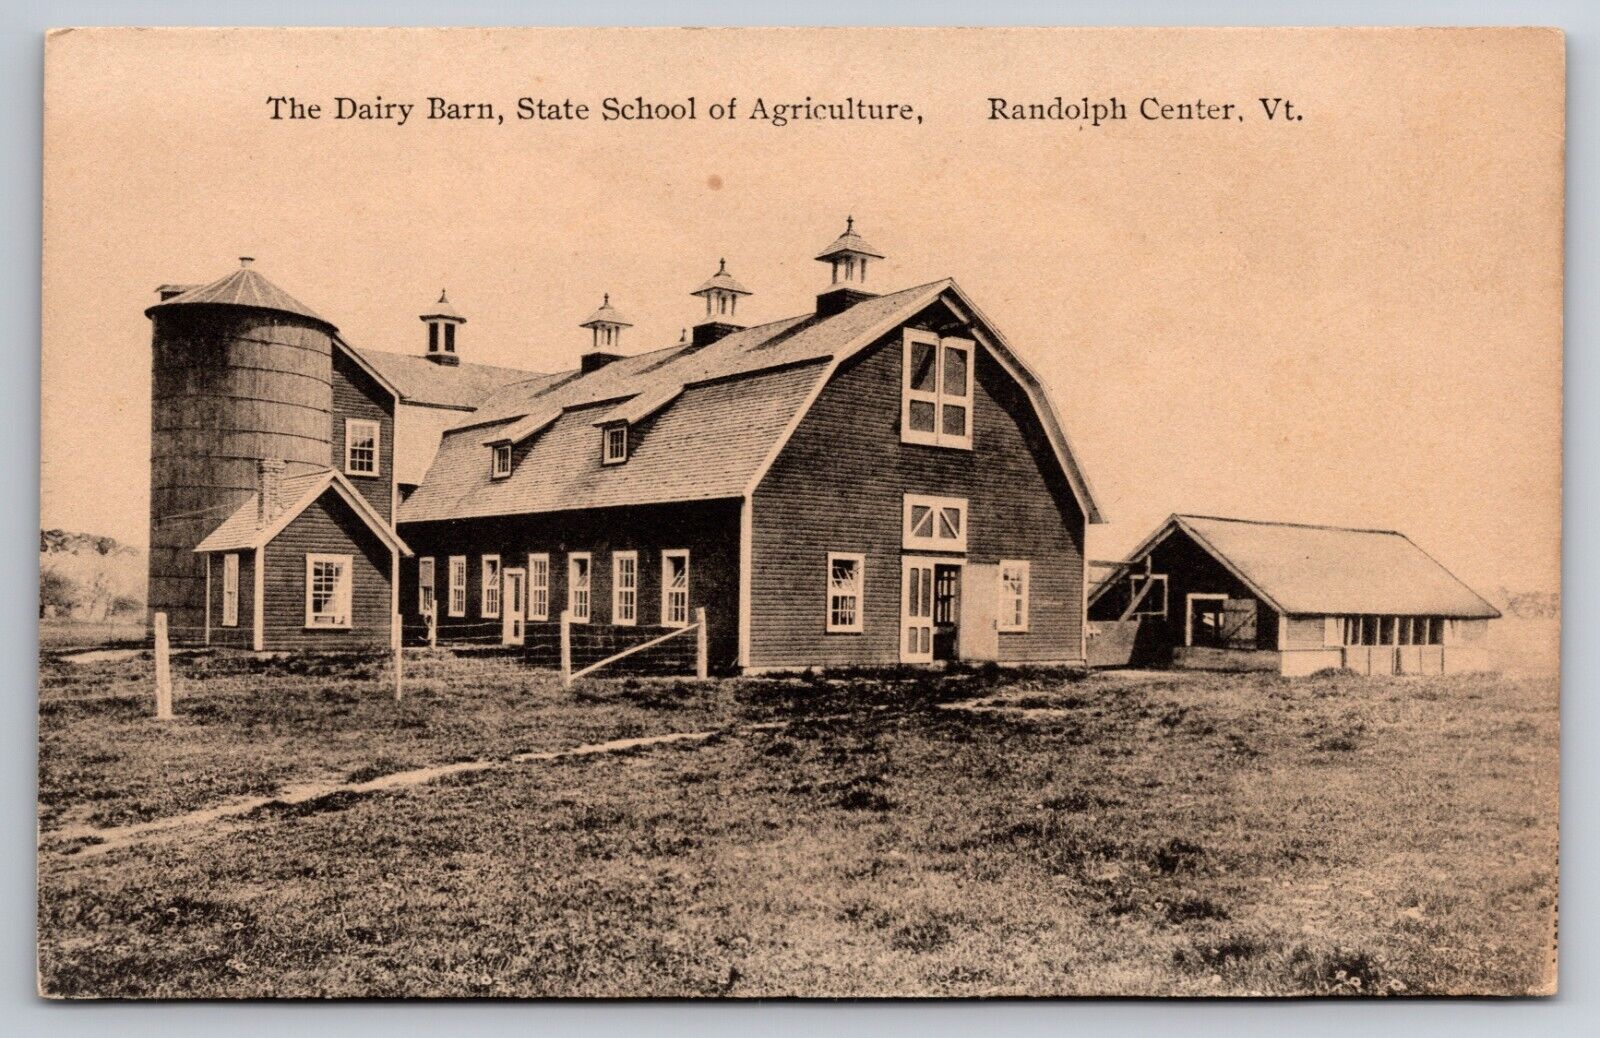 Dairy Barn State School of Agriculture Randolph Center Vermont c1910 Postcard